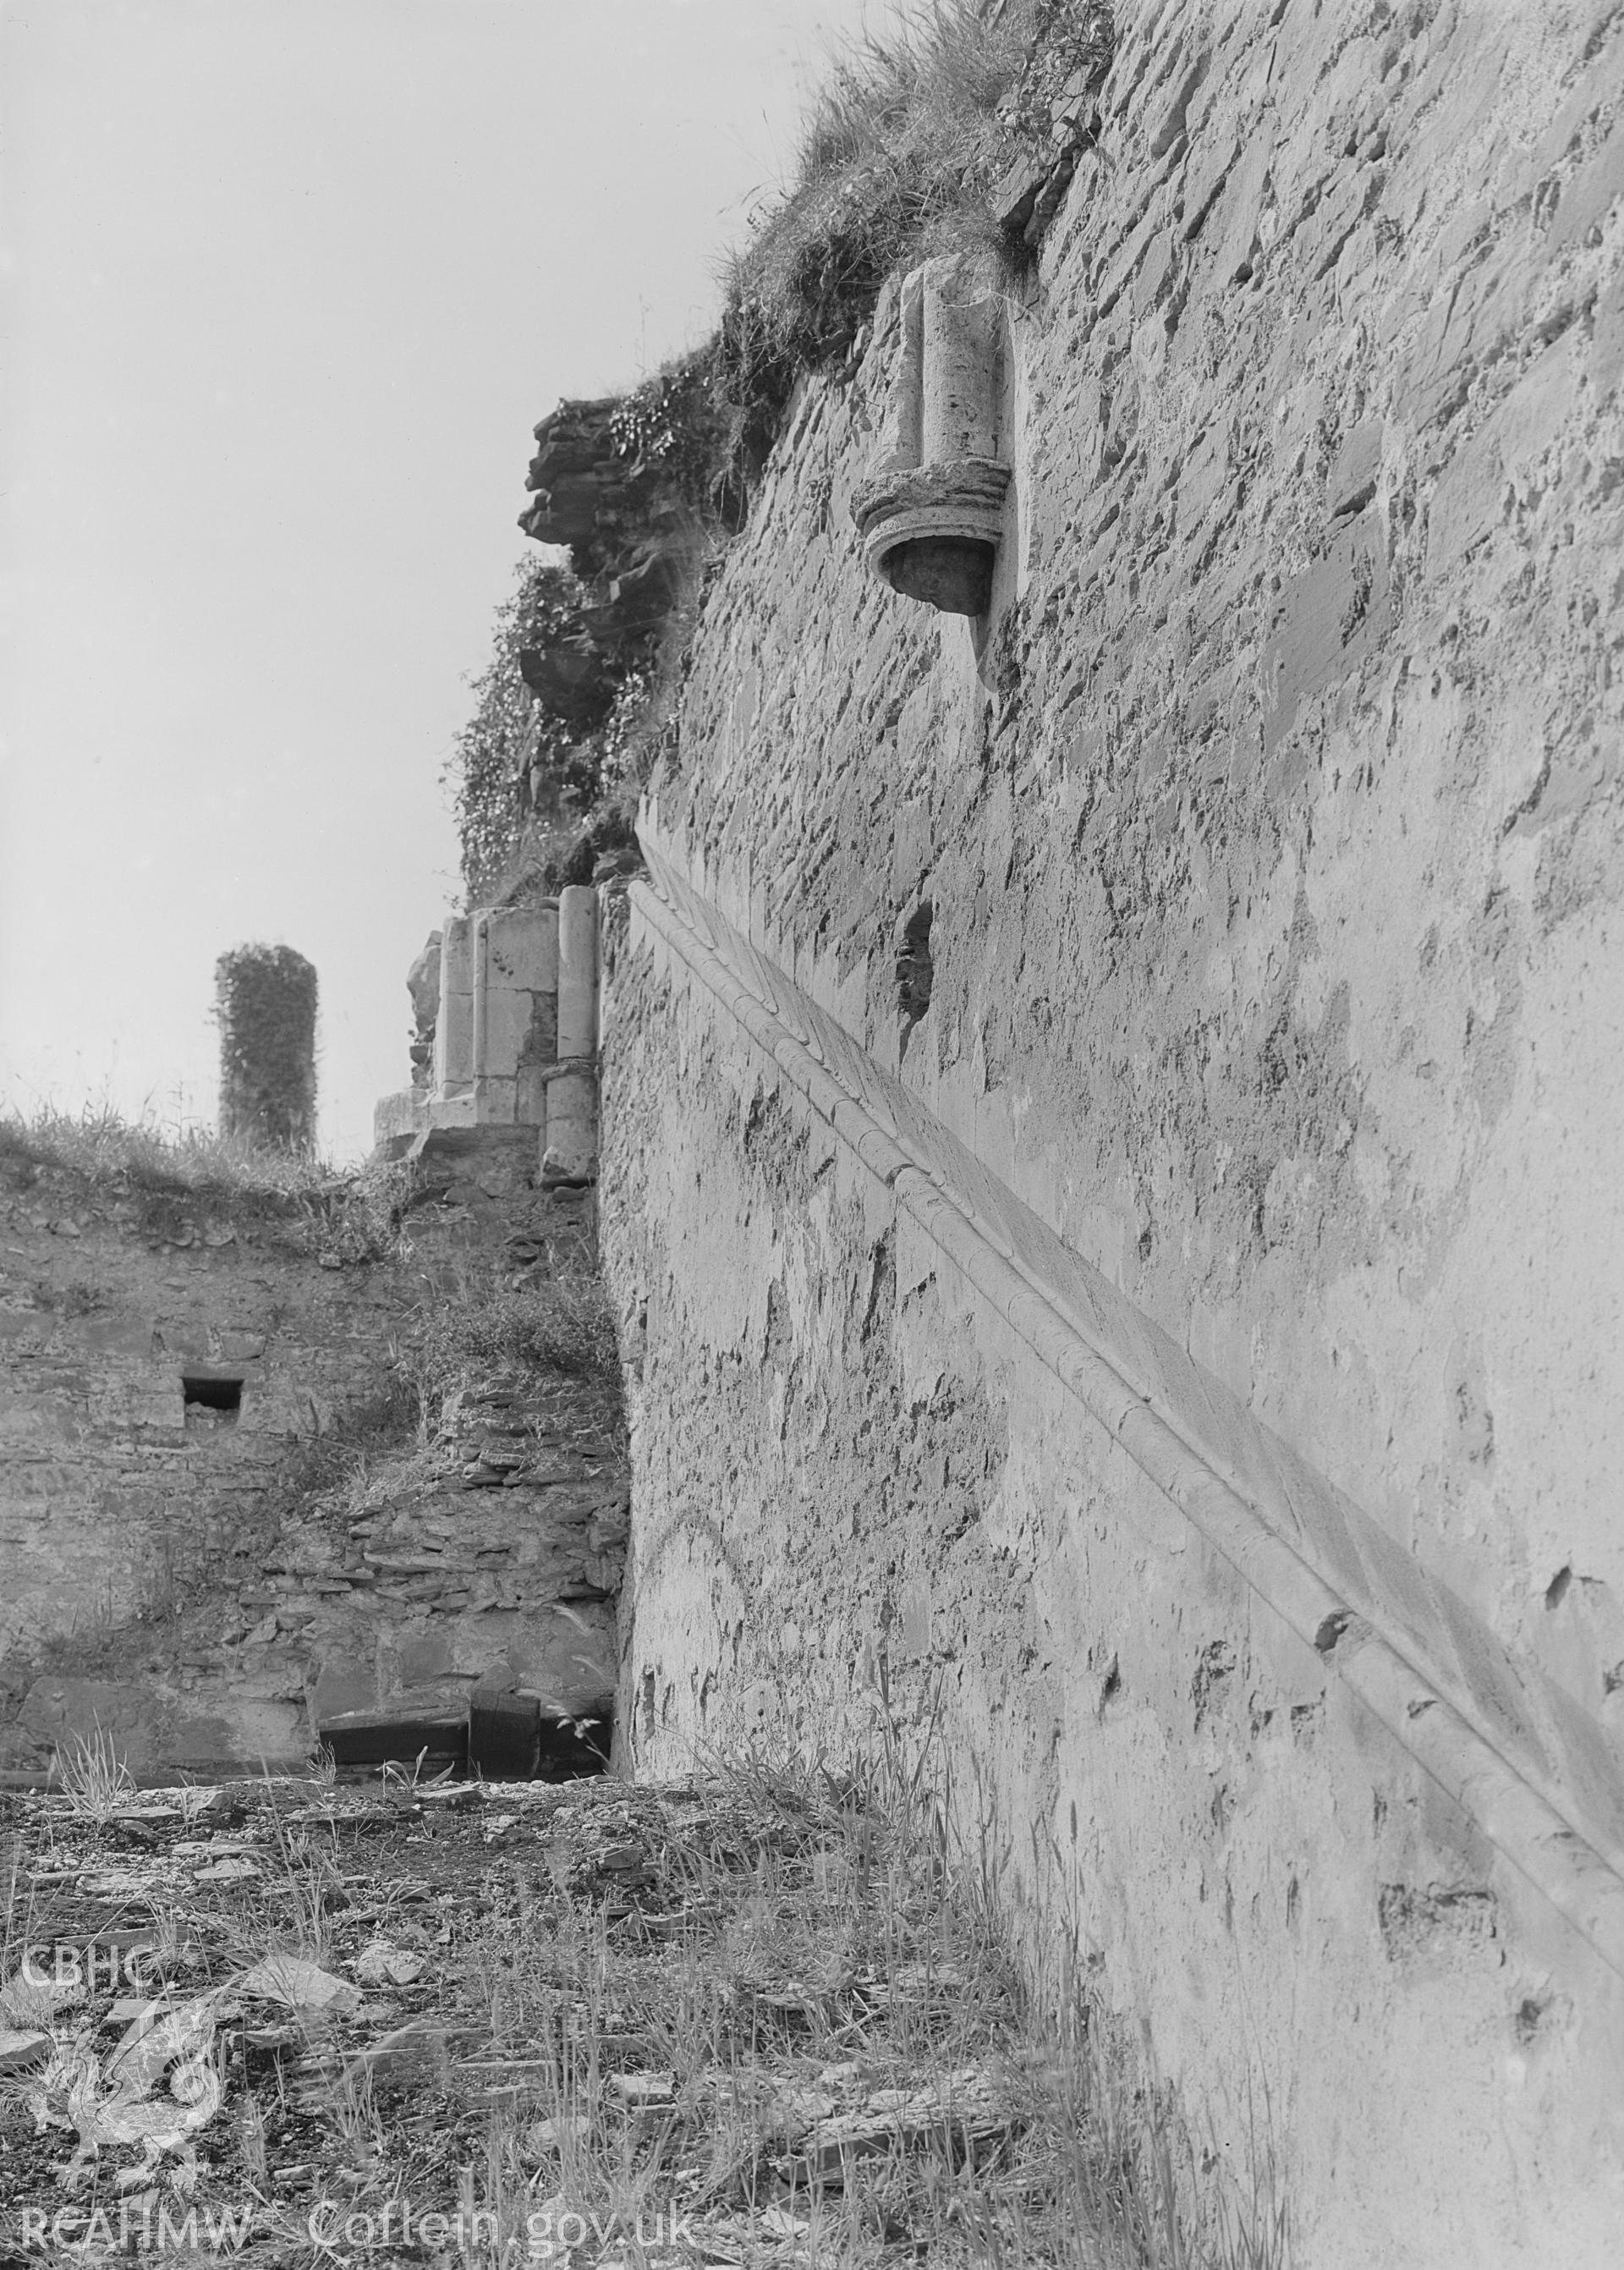 View of Neath Abbey showing handrail on the right staircase on the aisle, taken by Clayton pre-1950.